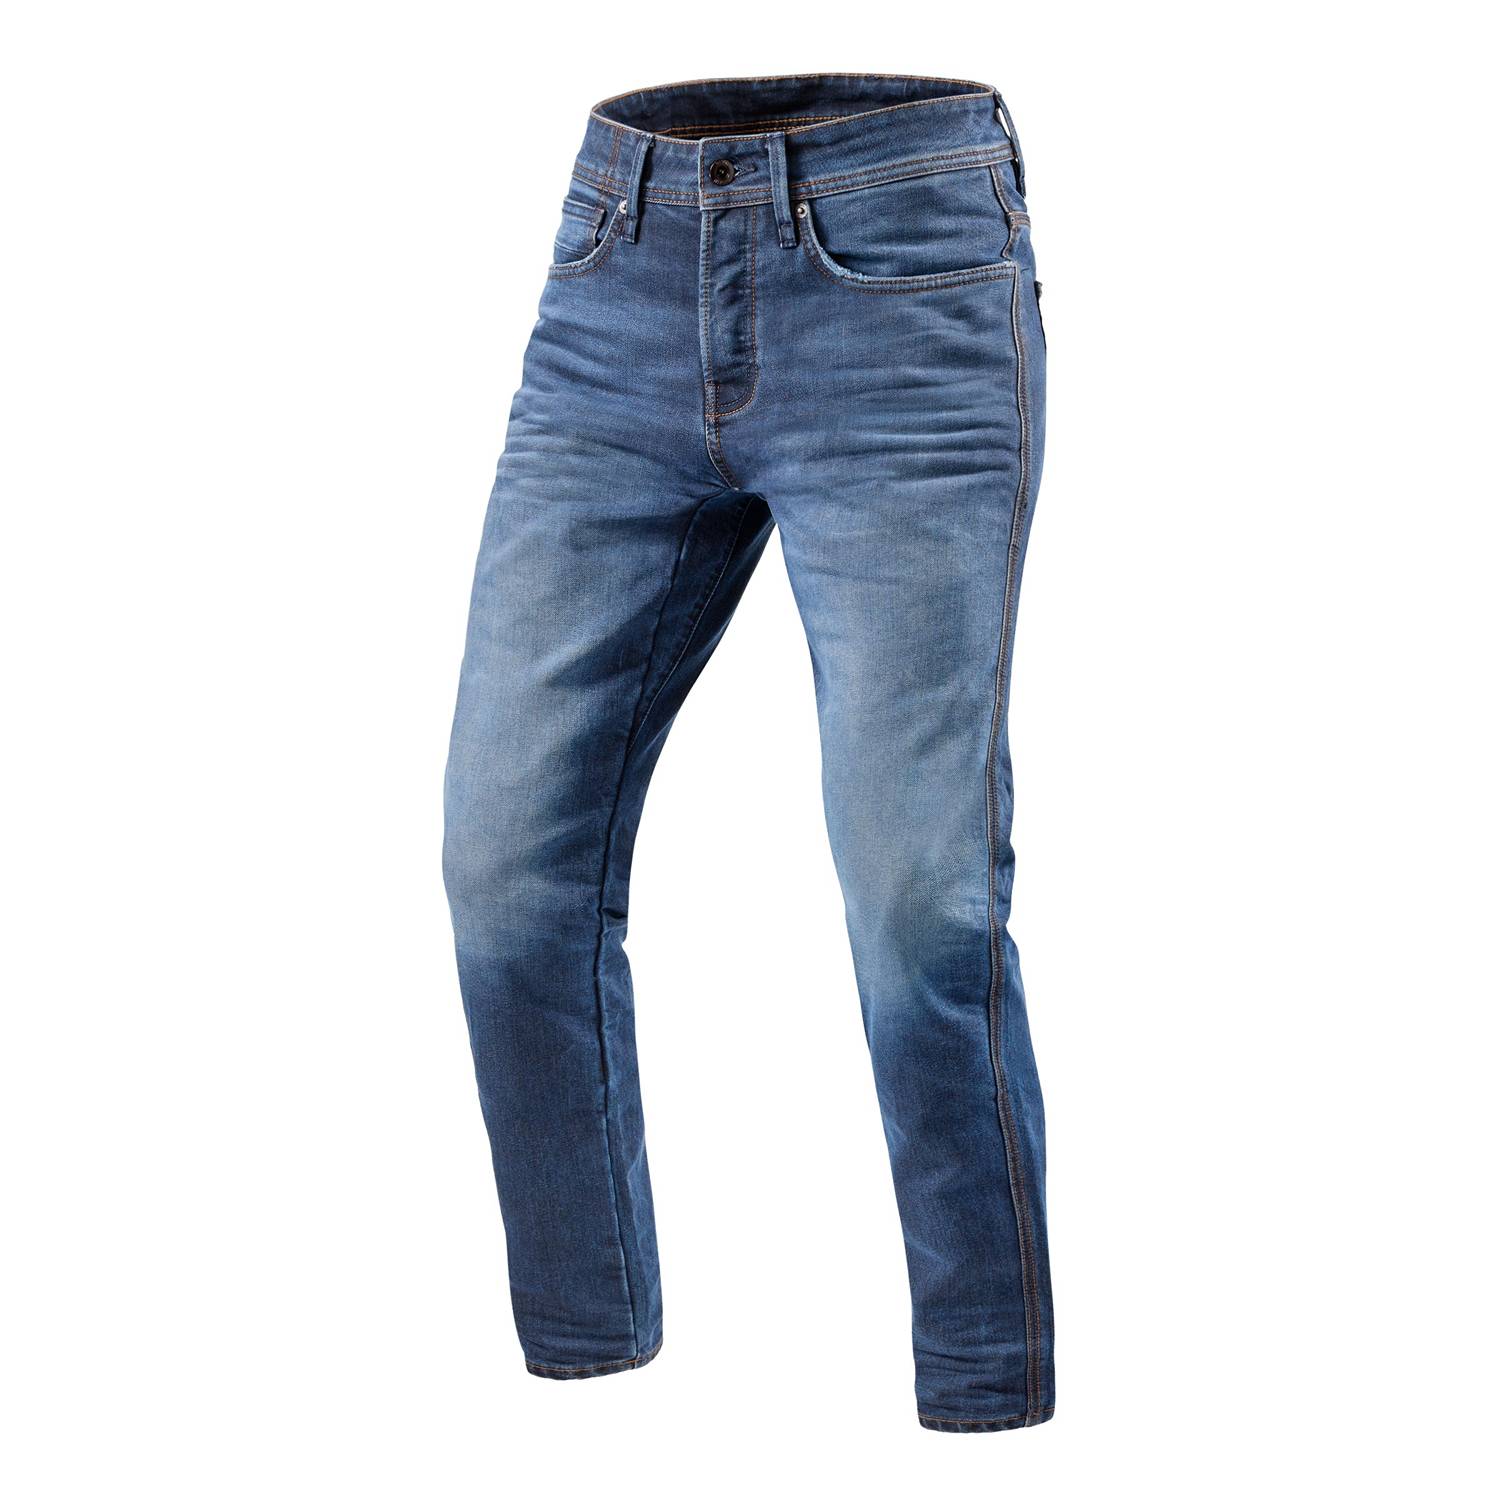 Image of REV'IT! Jeans Reed SF Mid Blue Used Motorcycle Jeans Size L34/W31 ID 8700001337168